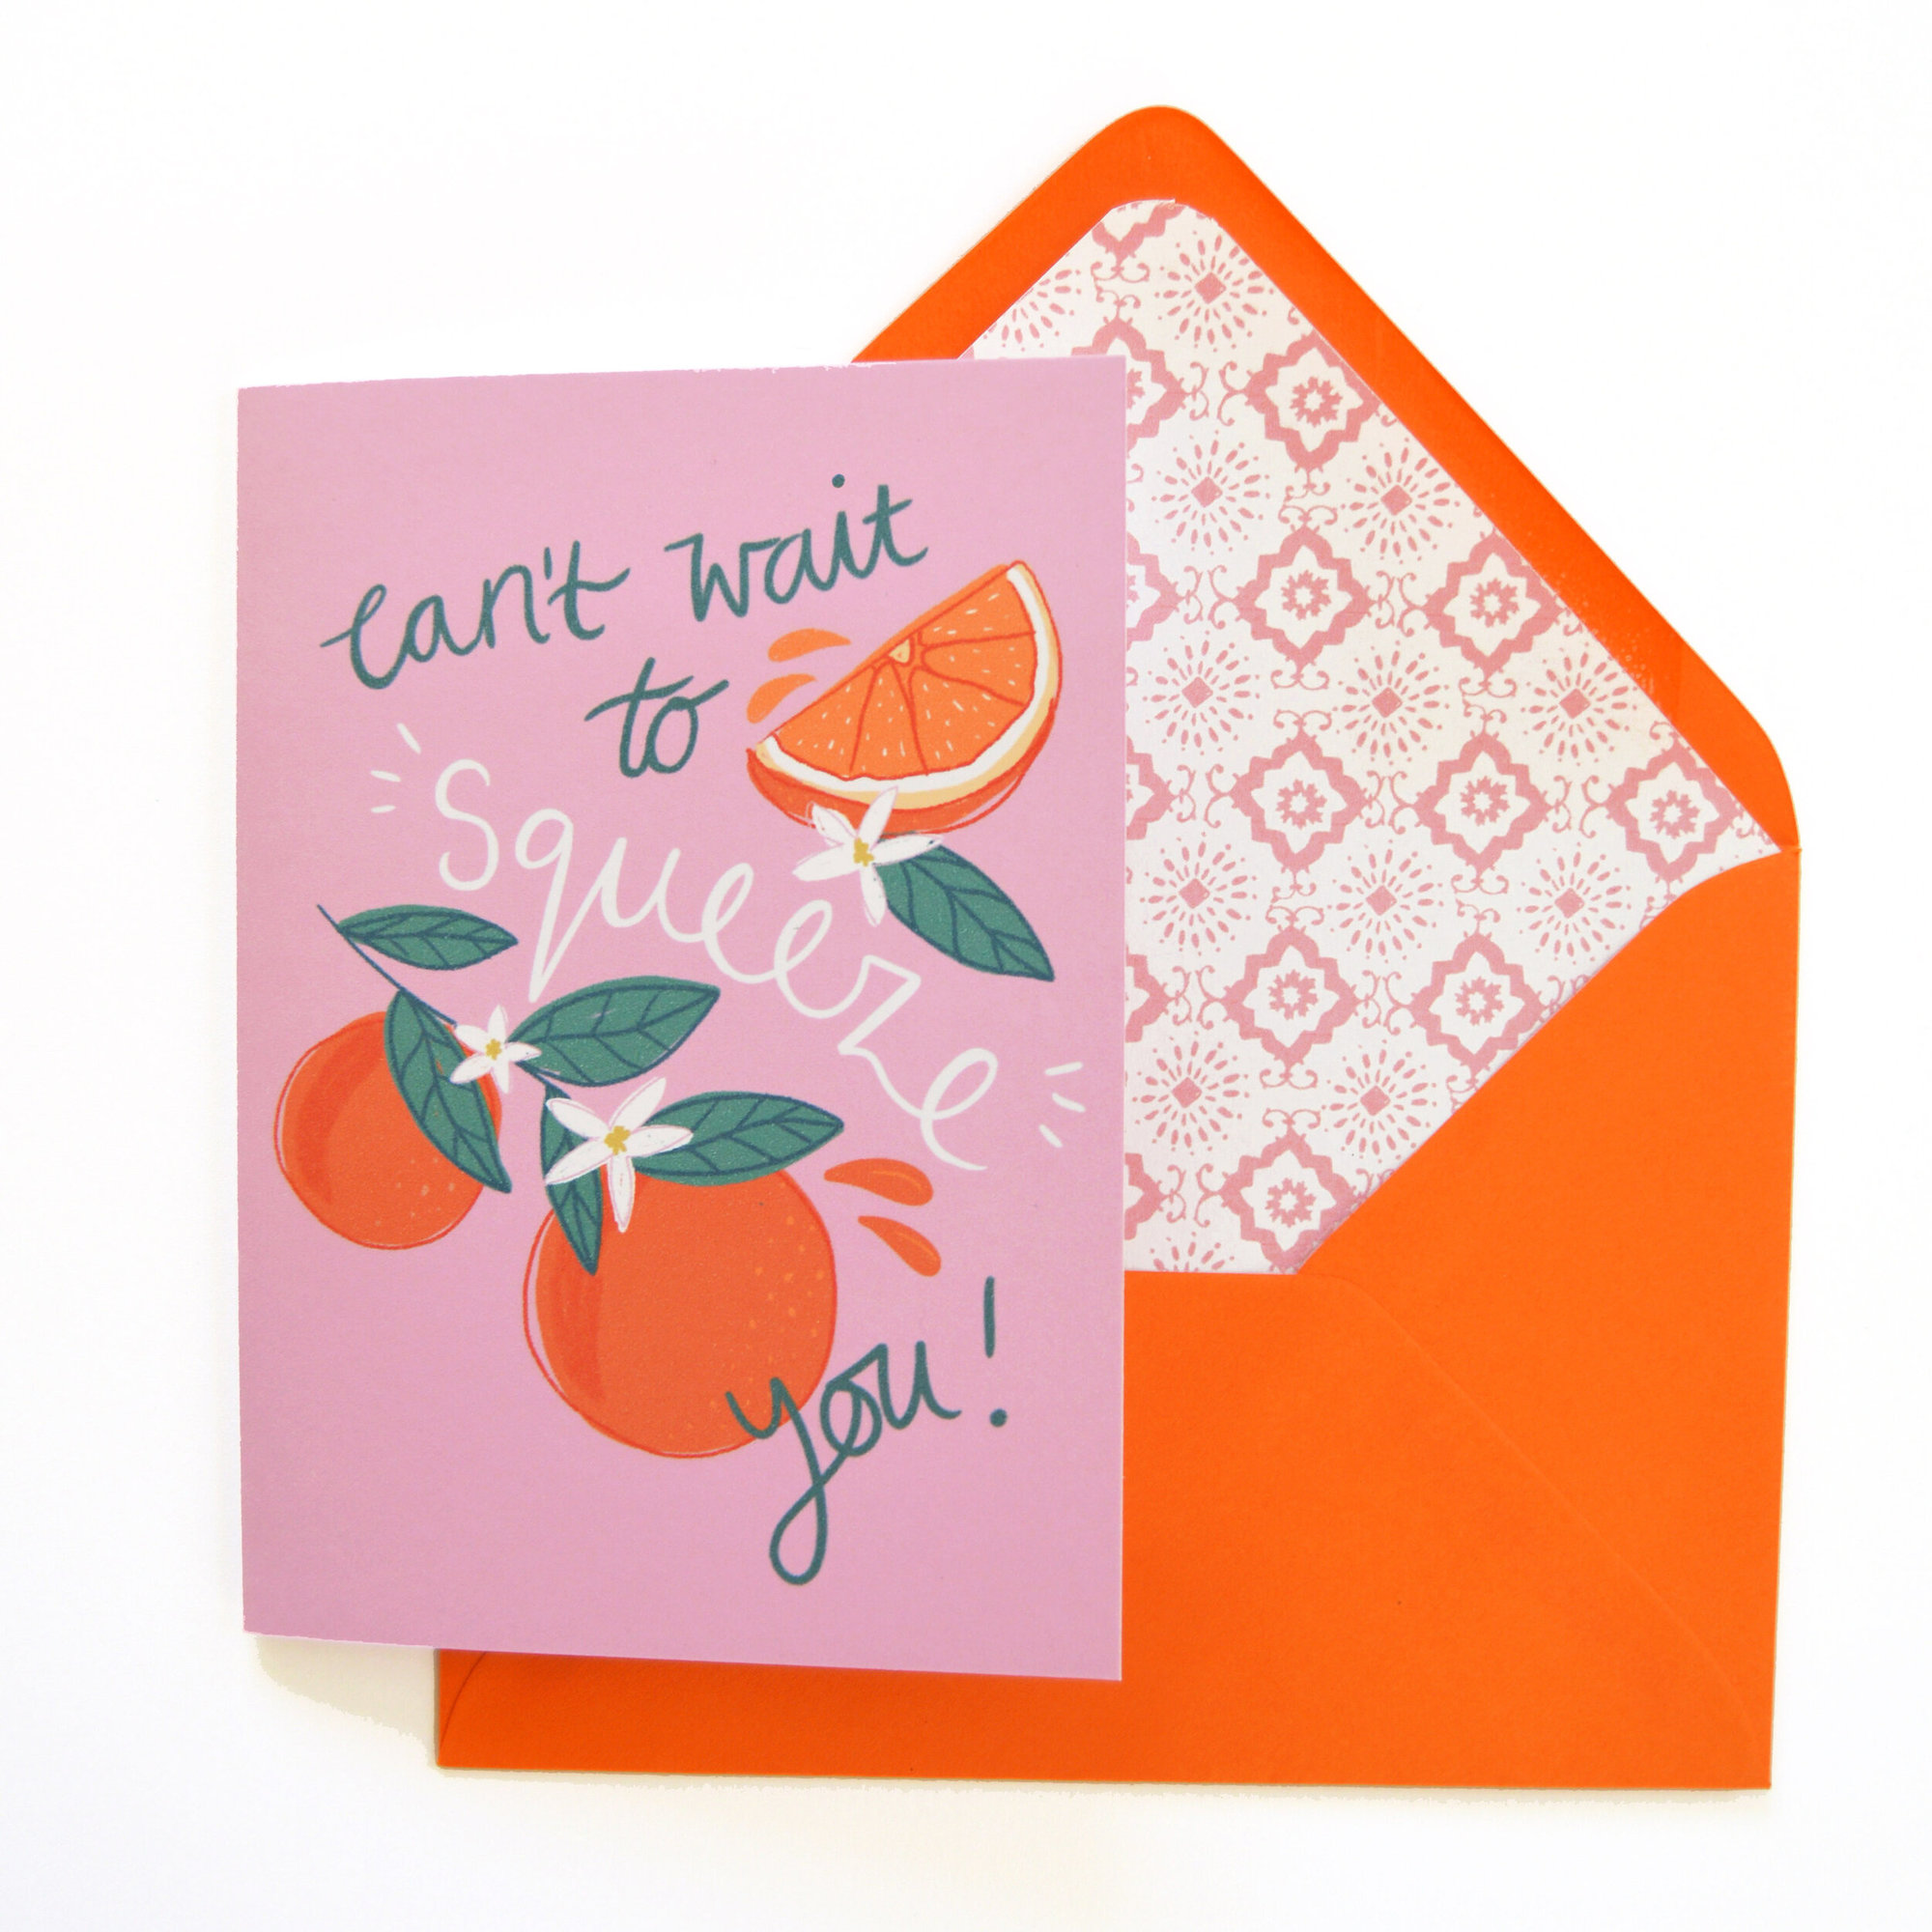 Can't Wait To Squeeze You! 
Botanical Orange Card - Just the card, Lined Envelope